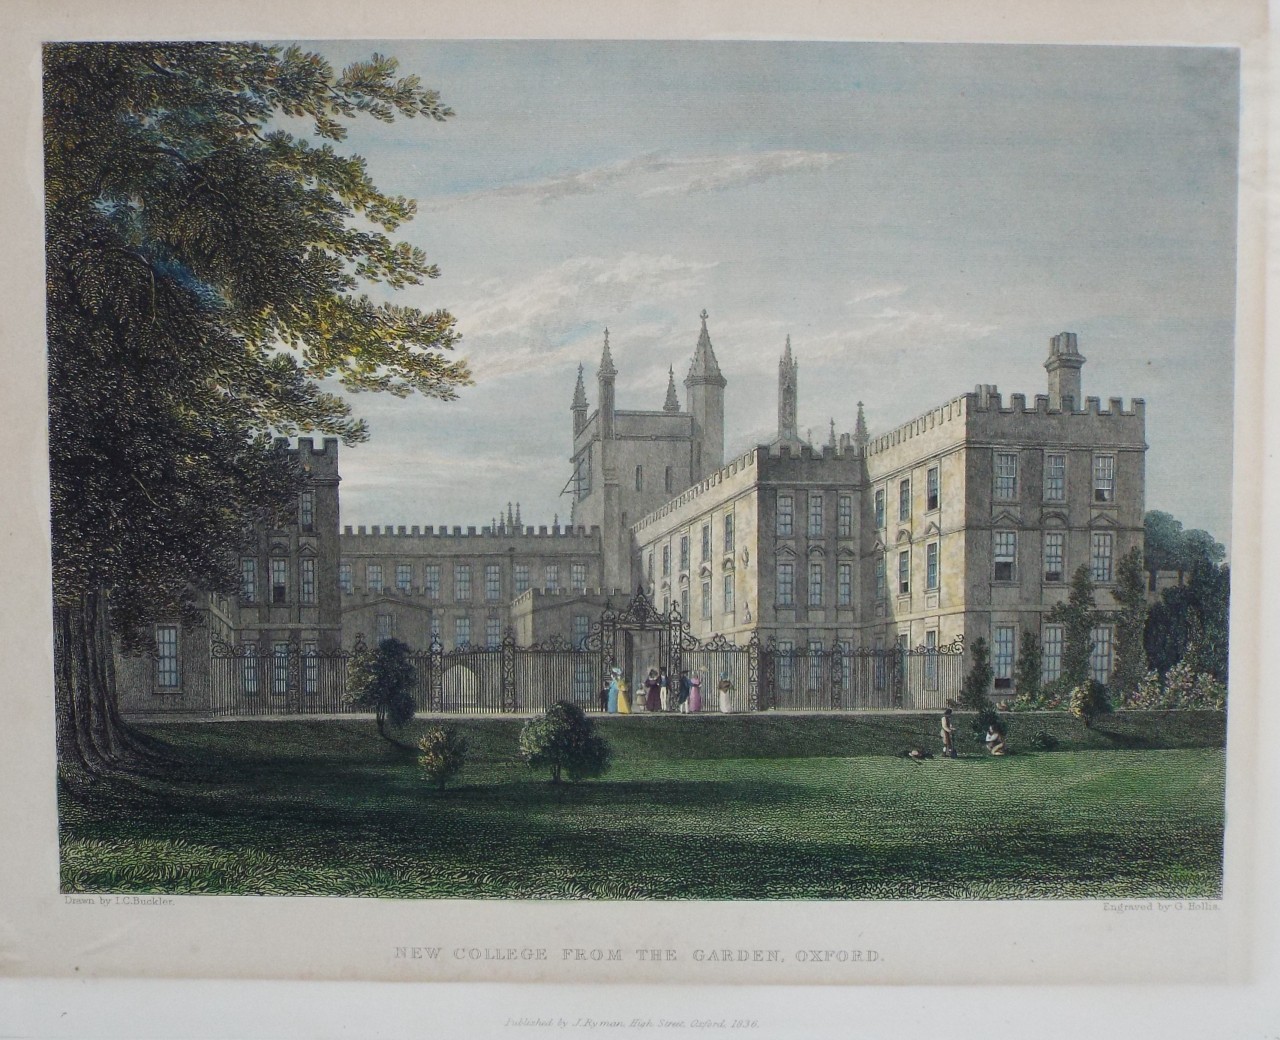 Print - New College from the Garden, Oxford. - Hollis